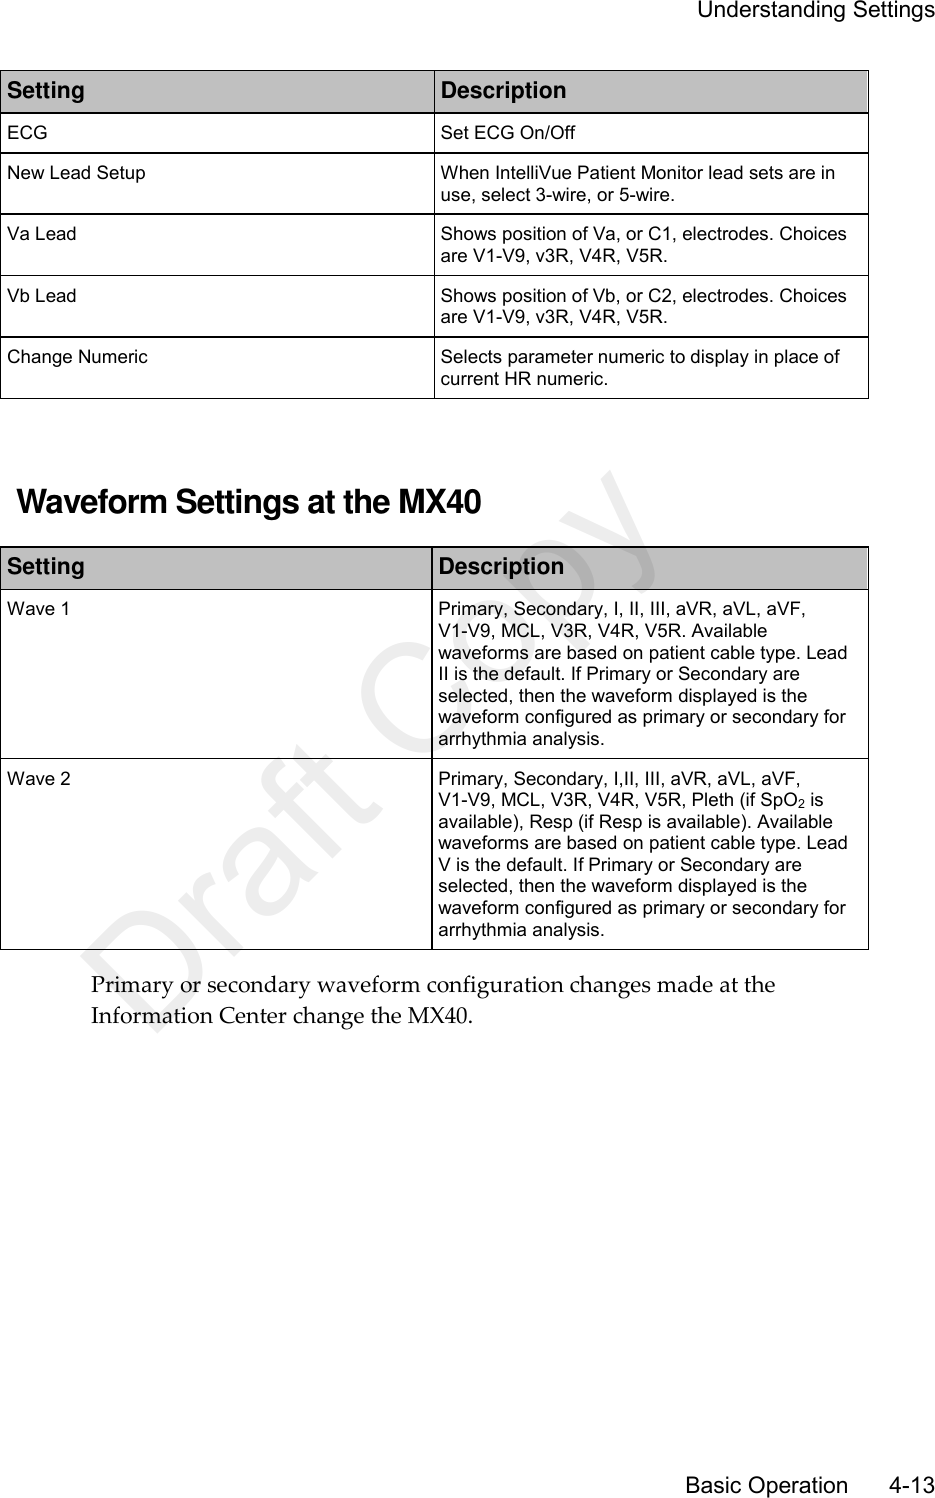     Understanding Settings       Basic Operation      4-13 Setting Description ECG Set ECG On/Off New Lead Setup When IntelliVue Patient Monitor lead sets are in use, select 3-wire, or 5-wire. Va Lead Shows position of Va, or C1, electrodes. Choices are V1-V9, v3R, V4R, V5R. Vb Lead Shows position of Vb, or C2, electrodes. Choices are V1-V9, v3R, V4R, V5R. Change Numeric Selects parameter numeric to display in place of current HR numeric.   Waveform Settings at the MX40 Setting Description Wave 1 Primary, Secondary, I, II, III, aVR, aVL, aVF, V1-V9, MCL, V3R, V4R, V5R. Available waveforms are based on patient cable type. Lead II is the default. If Primary or Secondary are selected, then the waveform displayed is the waveform configured as primary or secondary for arrhythmia analysis. Wave 2 Primary, Secondary, I,II, III, aVR, aVL, aVF, V1-V9, MCL, V3R, V4R, V5R, Pleth (if SpO2 is available), Resp (if Resp is available). Available waveforms are based on patient cable type. Lead V is the default. If Primary or Secondary are selected, then the waveform displayed is the waveform configured as primary or secondary for arrhythmia analysis. Primary or secondary waveform configuration changes made at the Information Center change the MX40.  Draft Copy